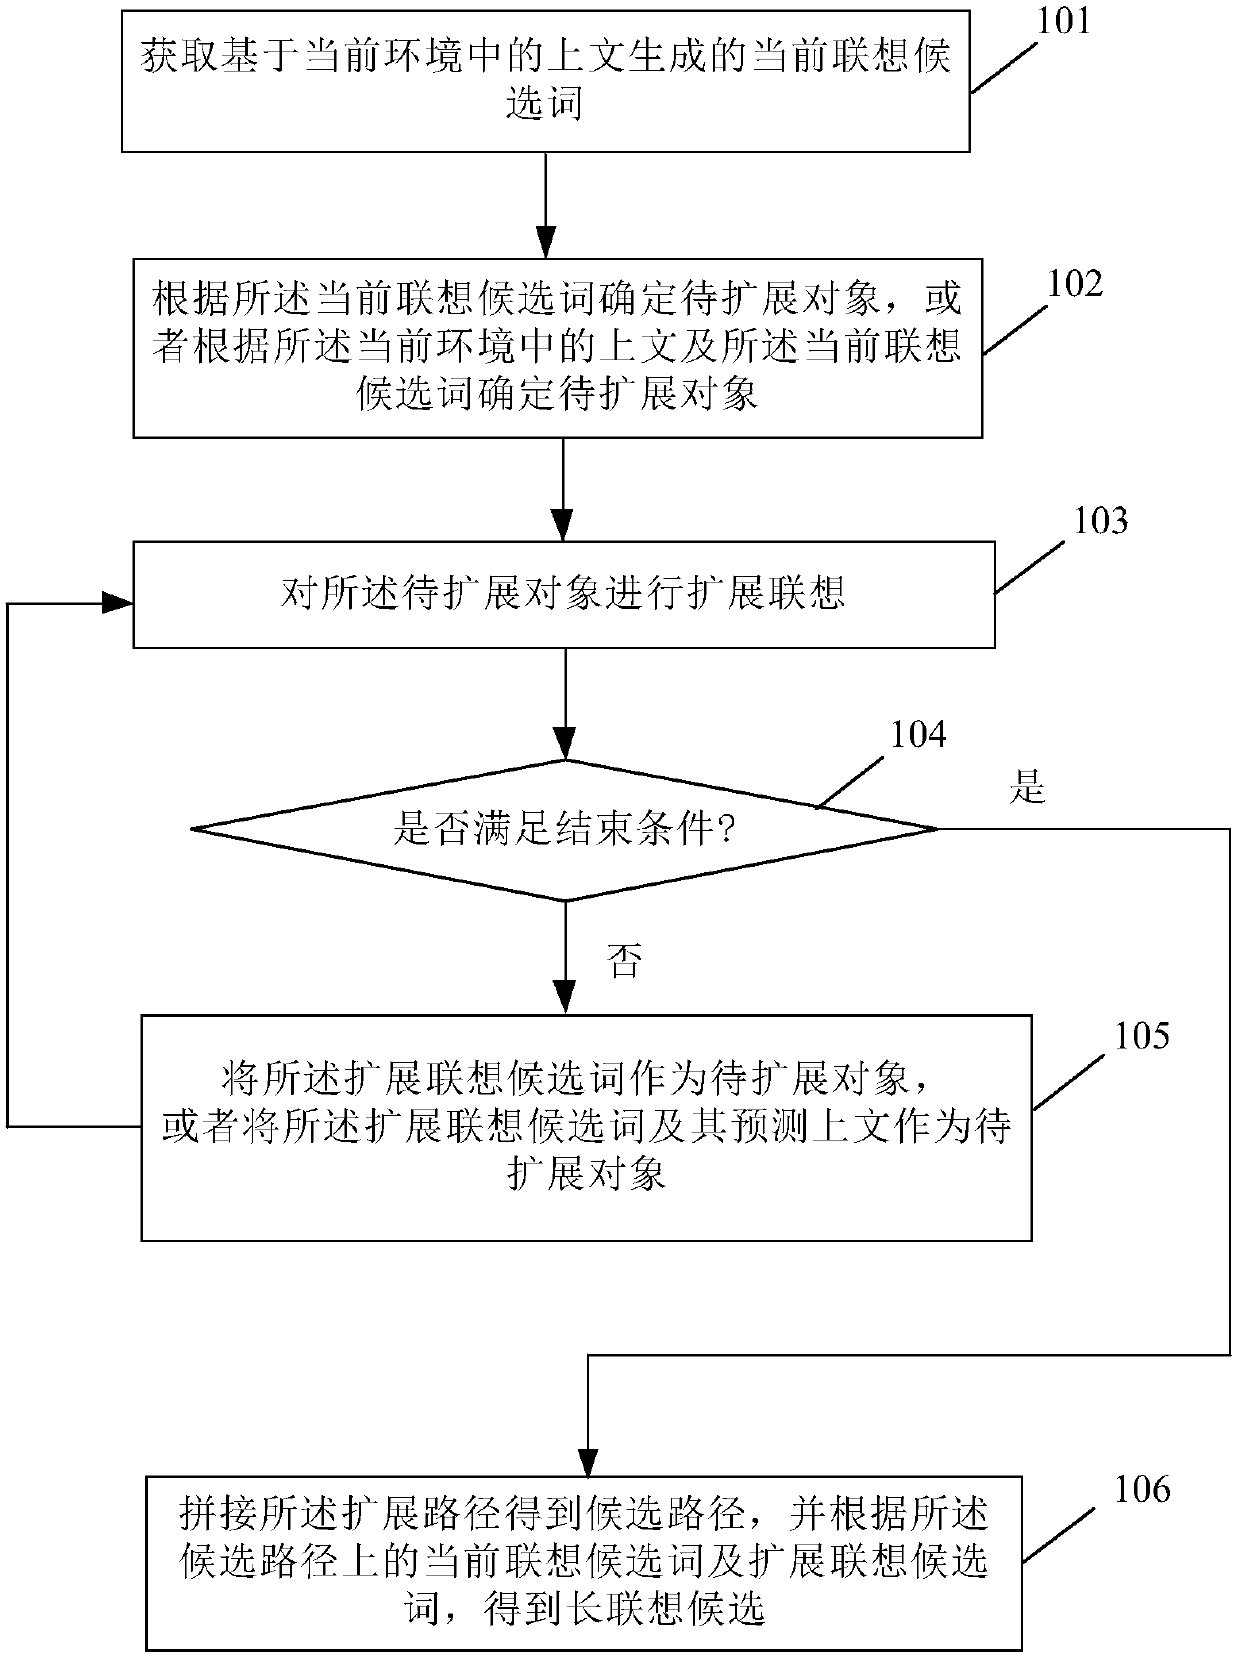 Association candidate generation method and device